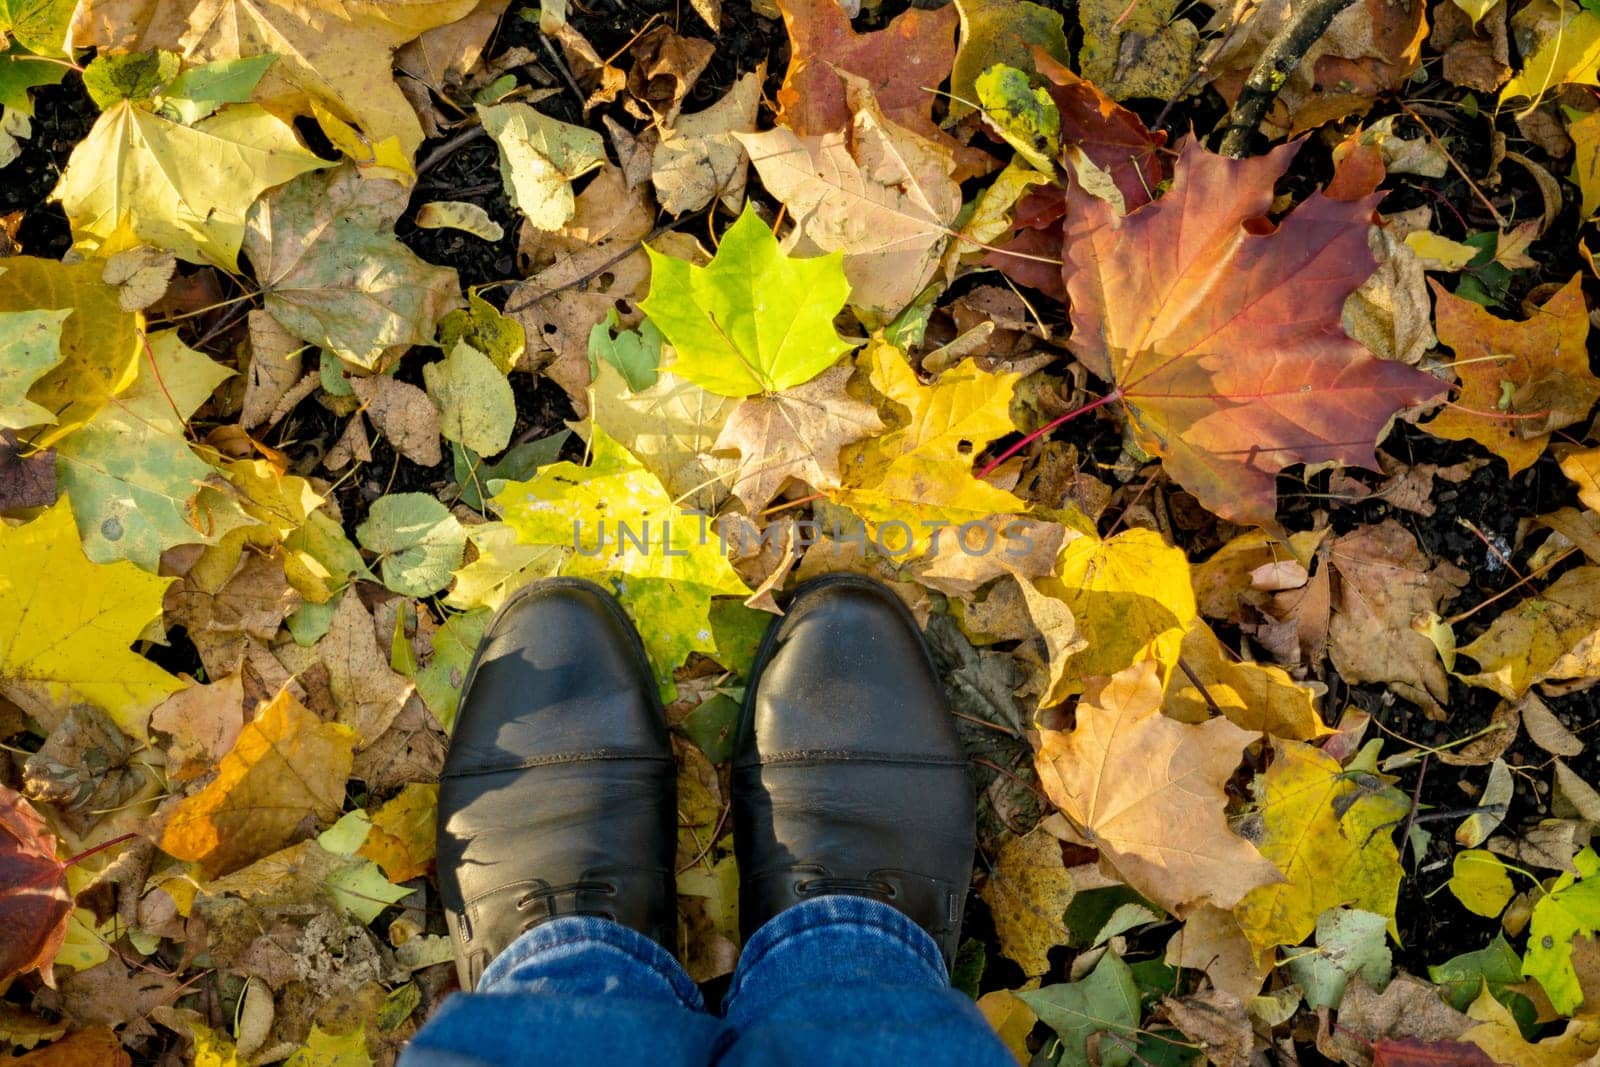 Fall, autumn, leaves, legs and shoes. Conceptual image of legs in boots on the autumn leaves. Feet shoes walking in nature